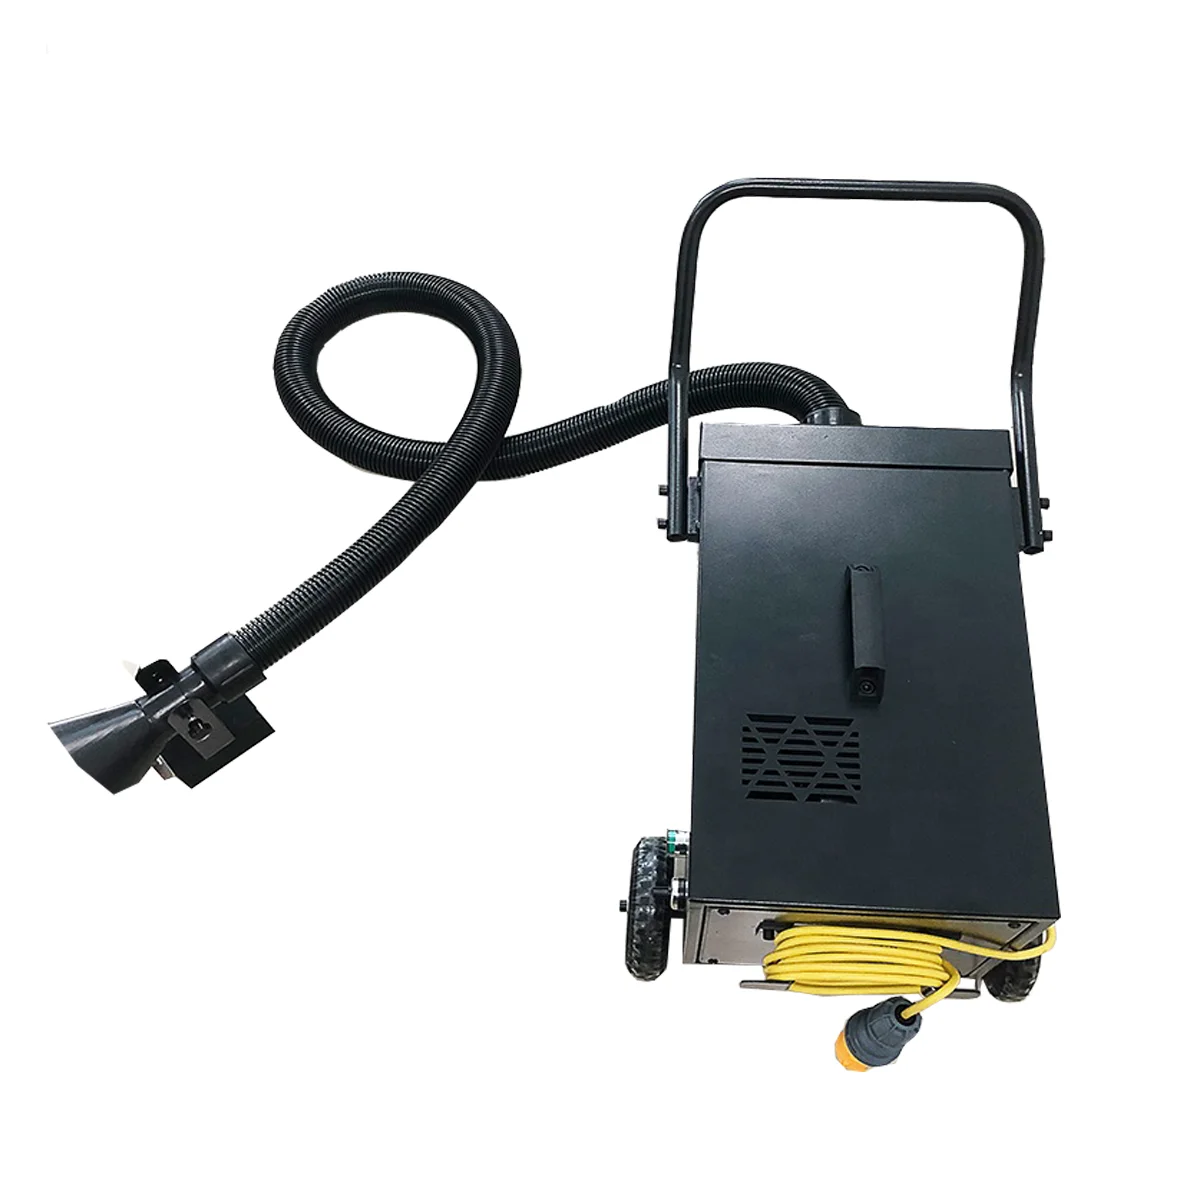 Portable convenient dust remover can be customized